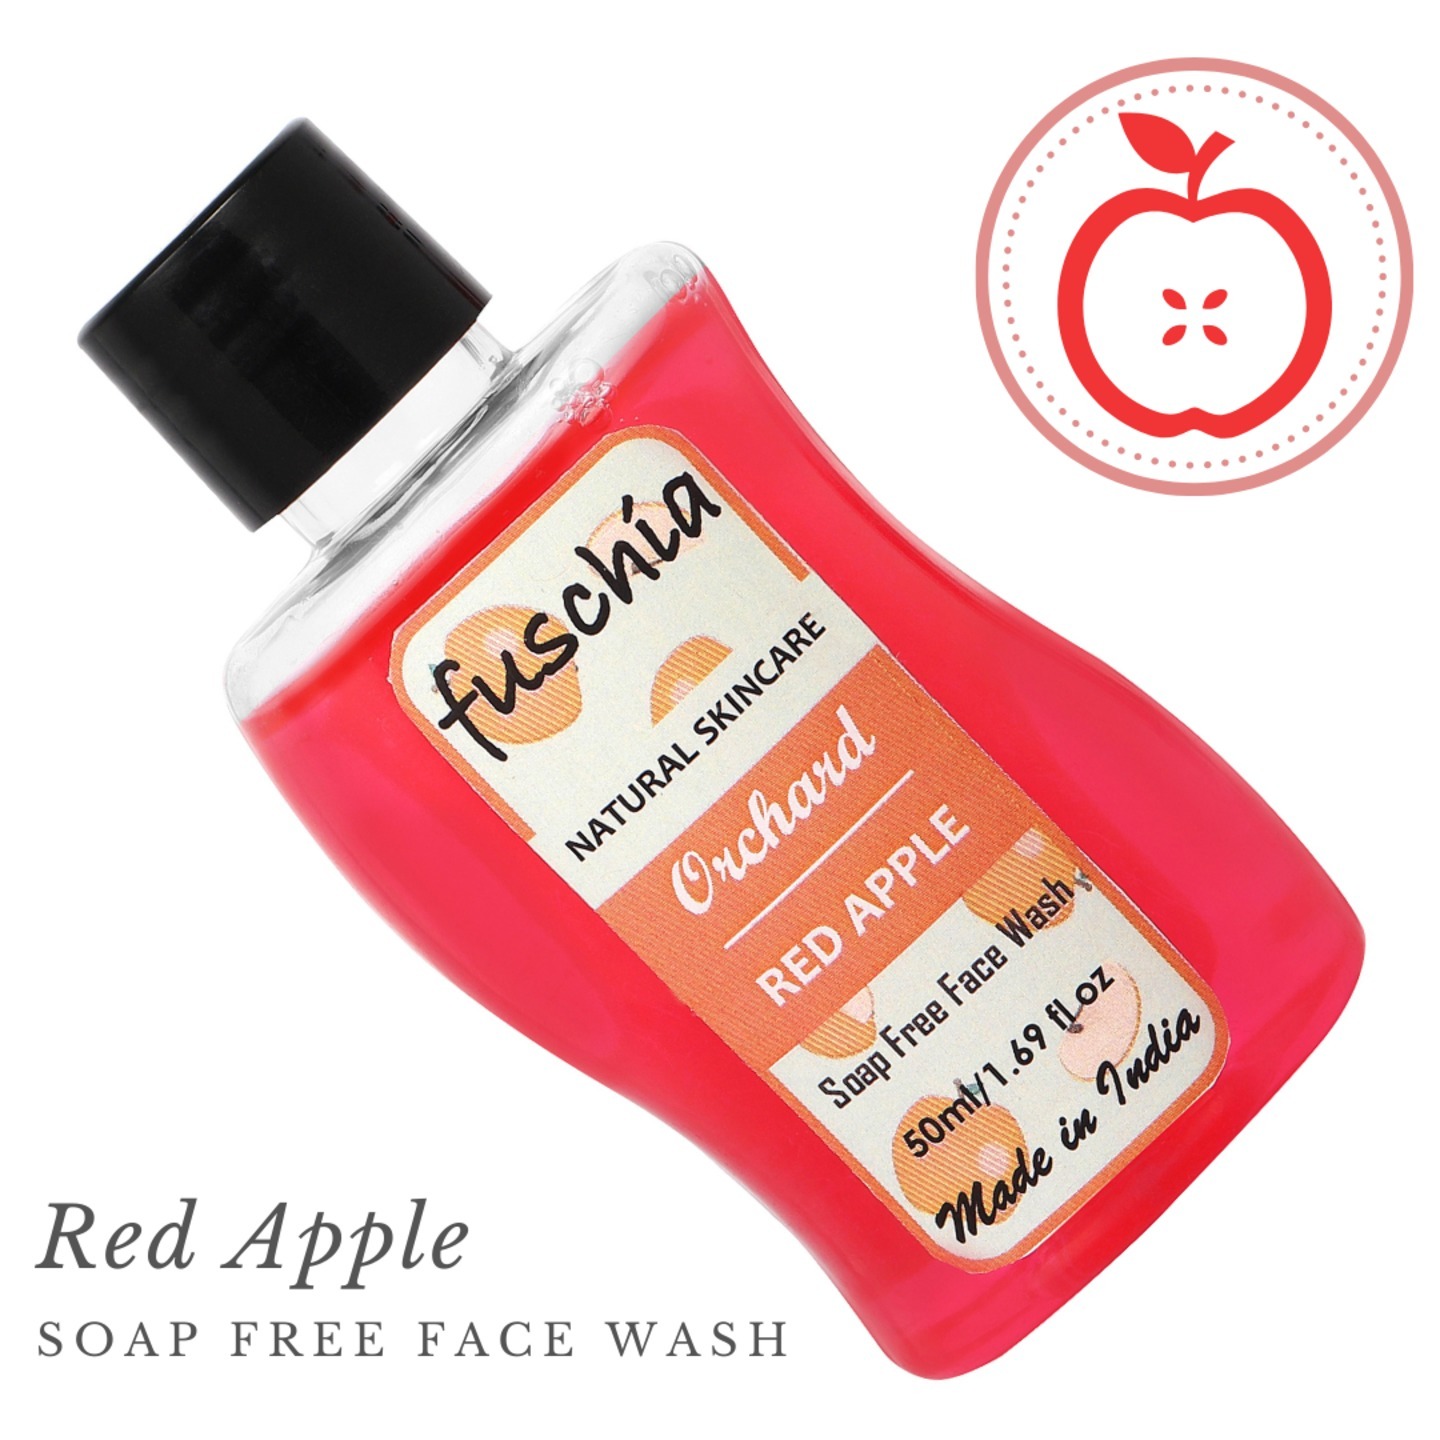 Fuschia Orchard Red Apple Soap Free Face Wash - 50ml